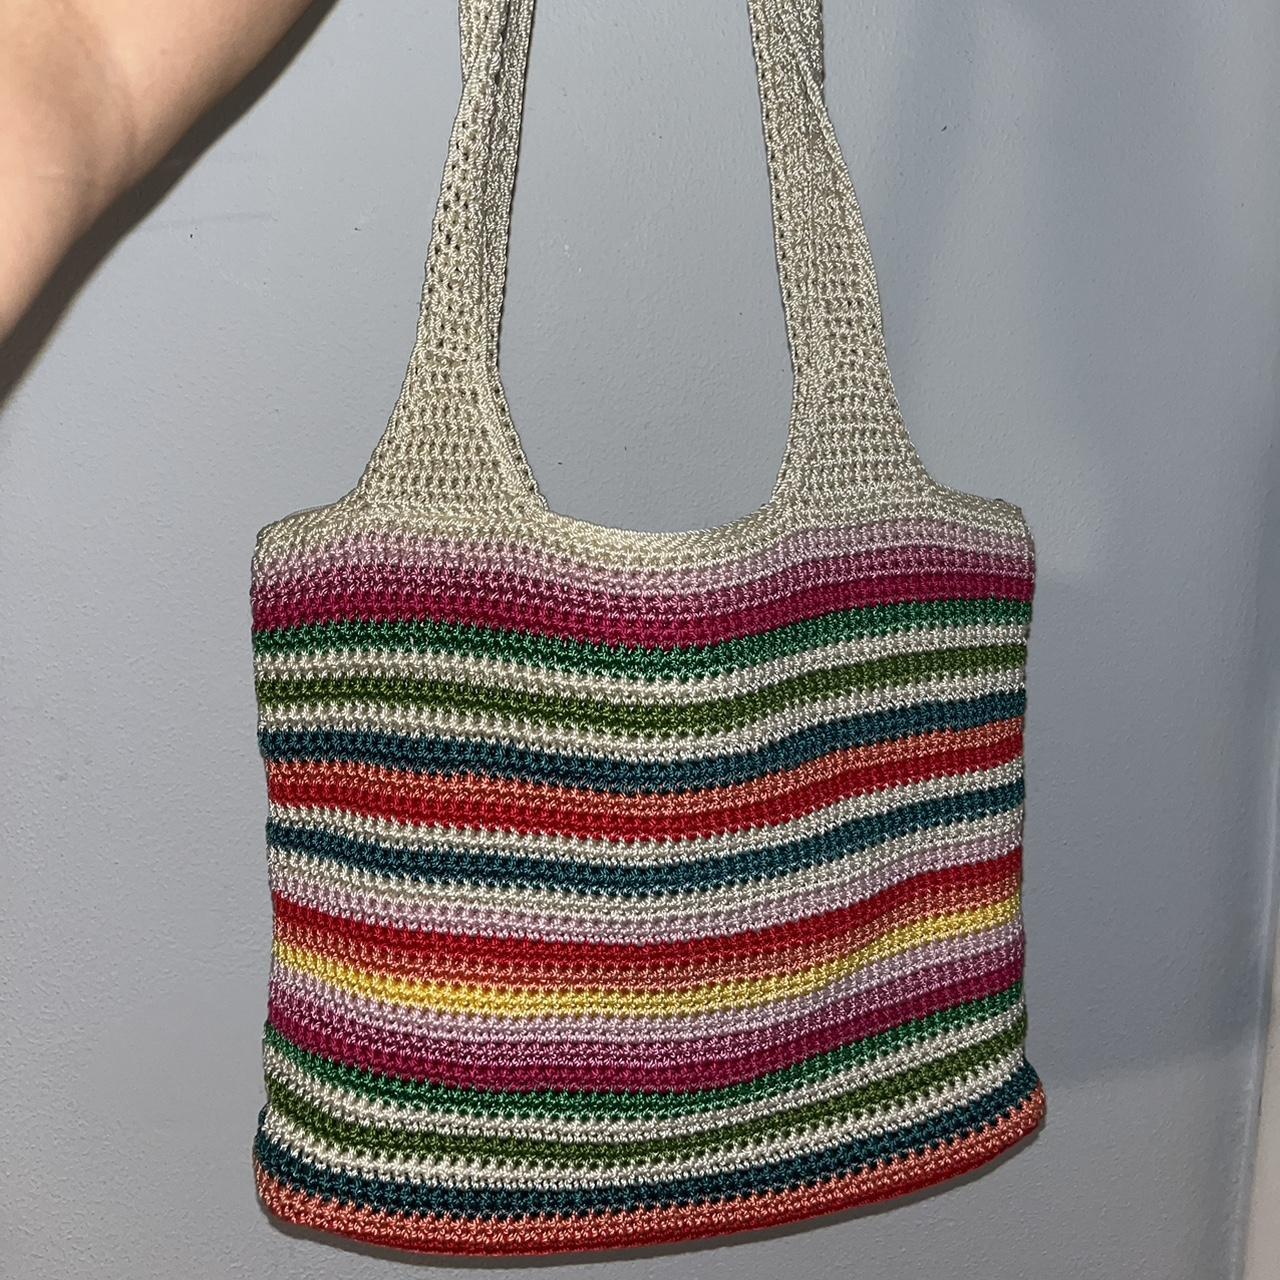 Product Image 2 - knit shoulder bag $40
perfect condition